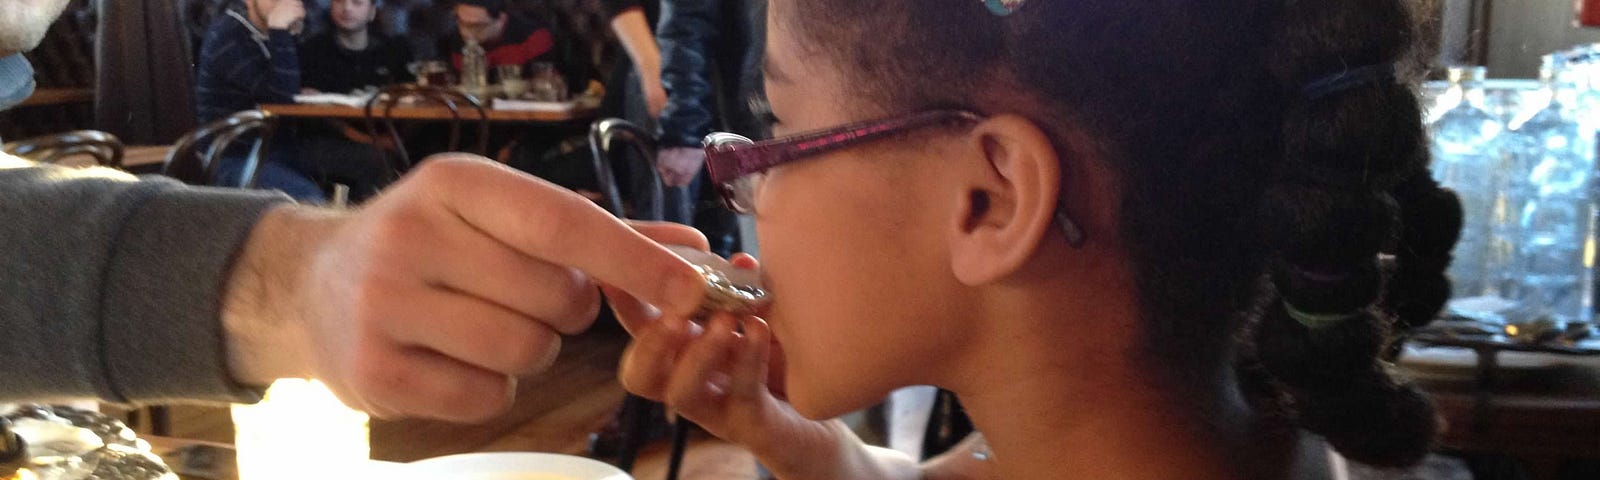 A young girl at a restaurant tries an oyster with help from her dad